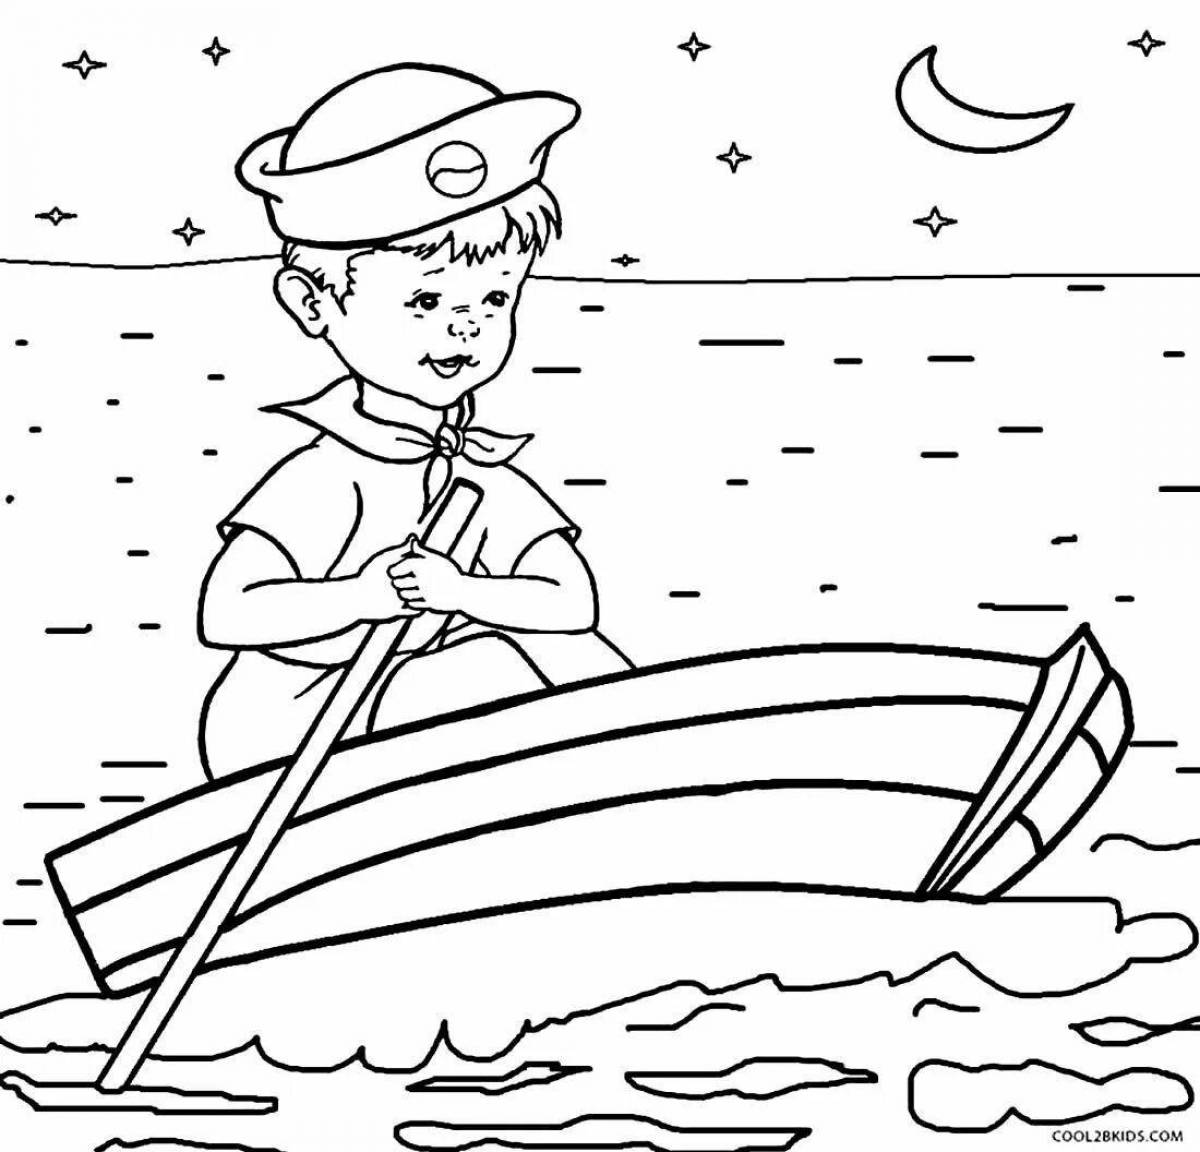 Tempting water transport coloring book for kids